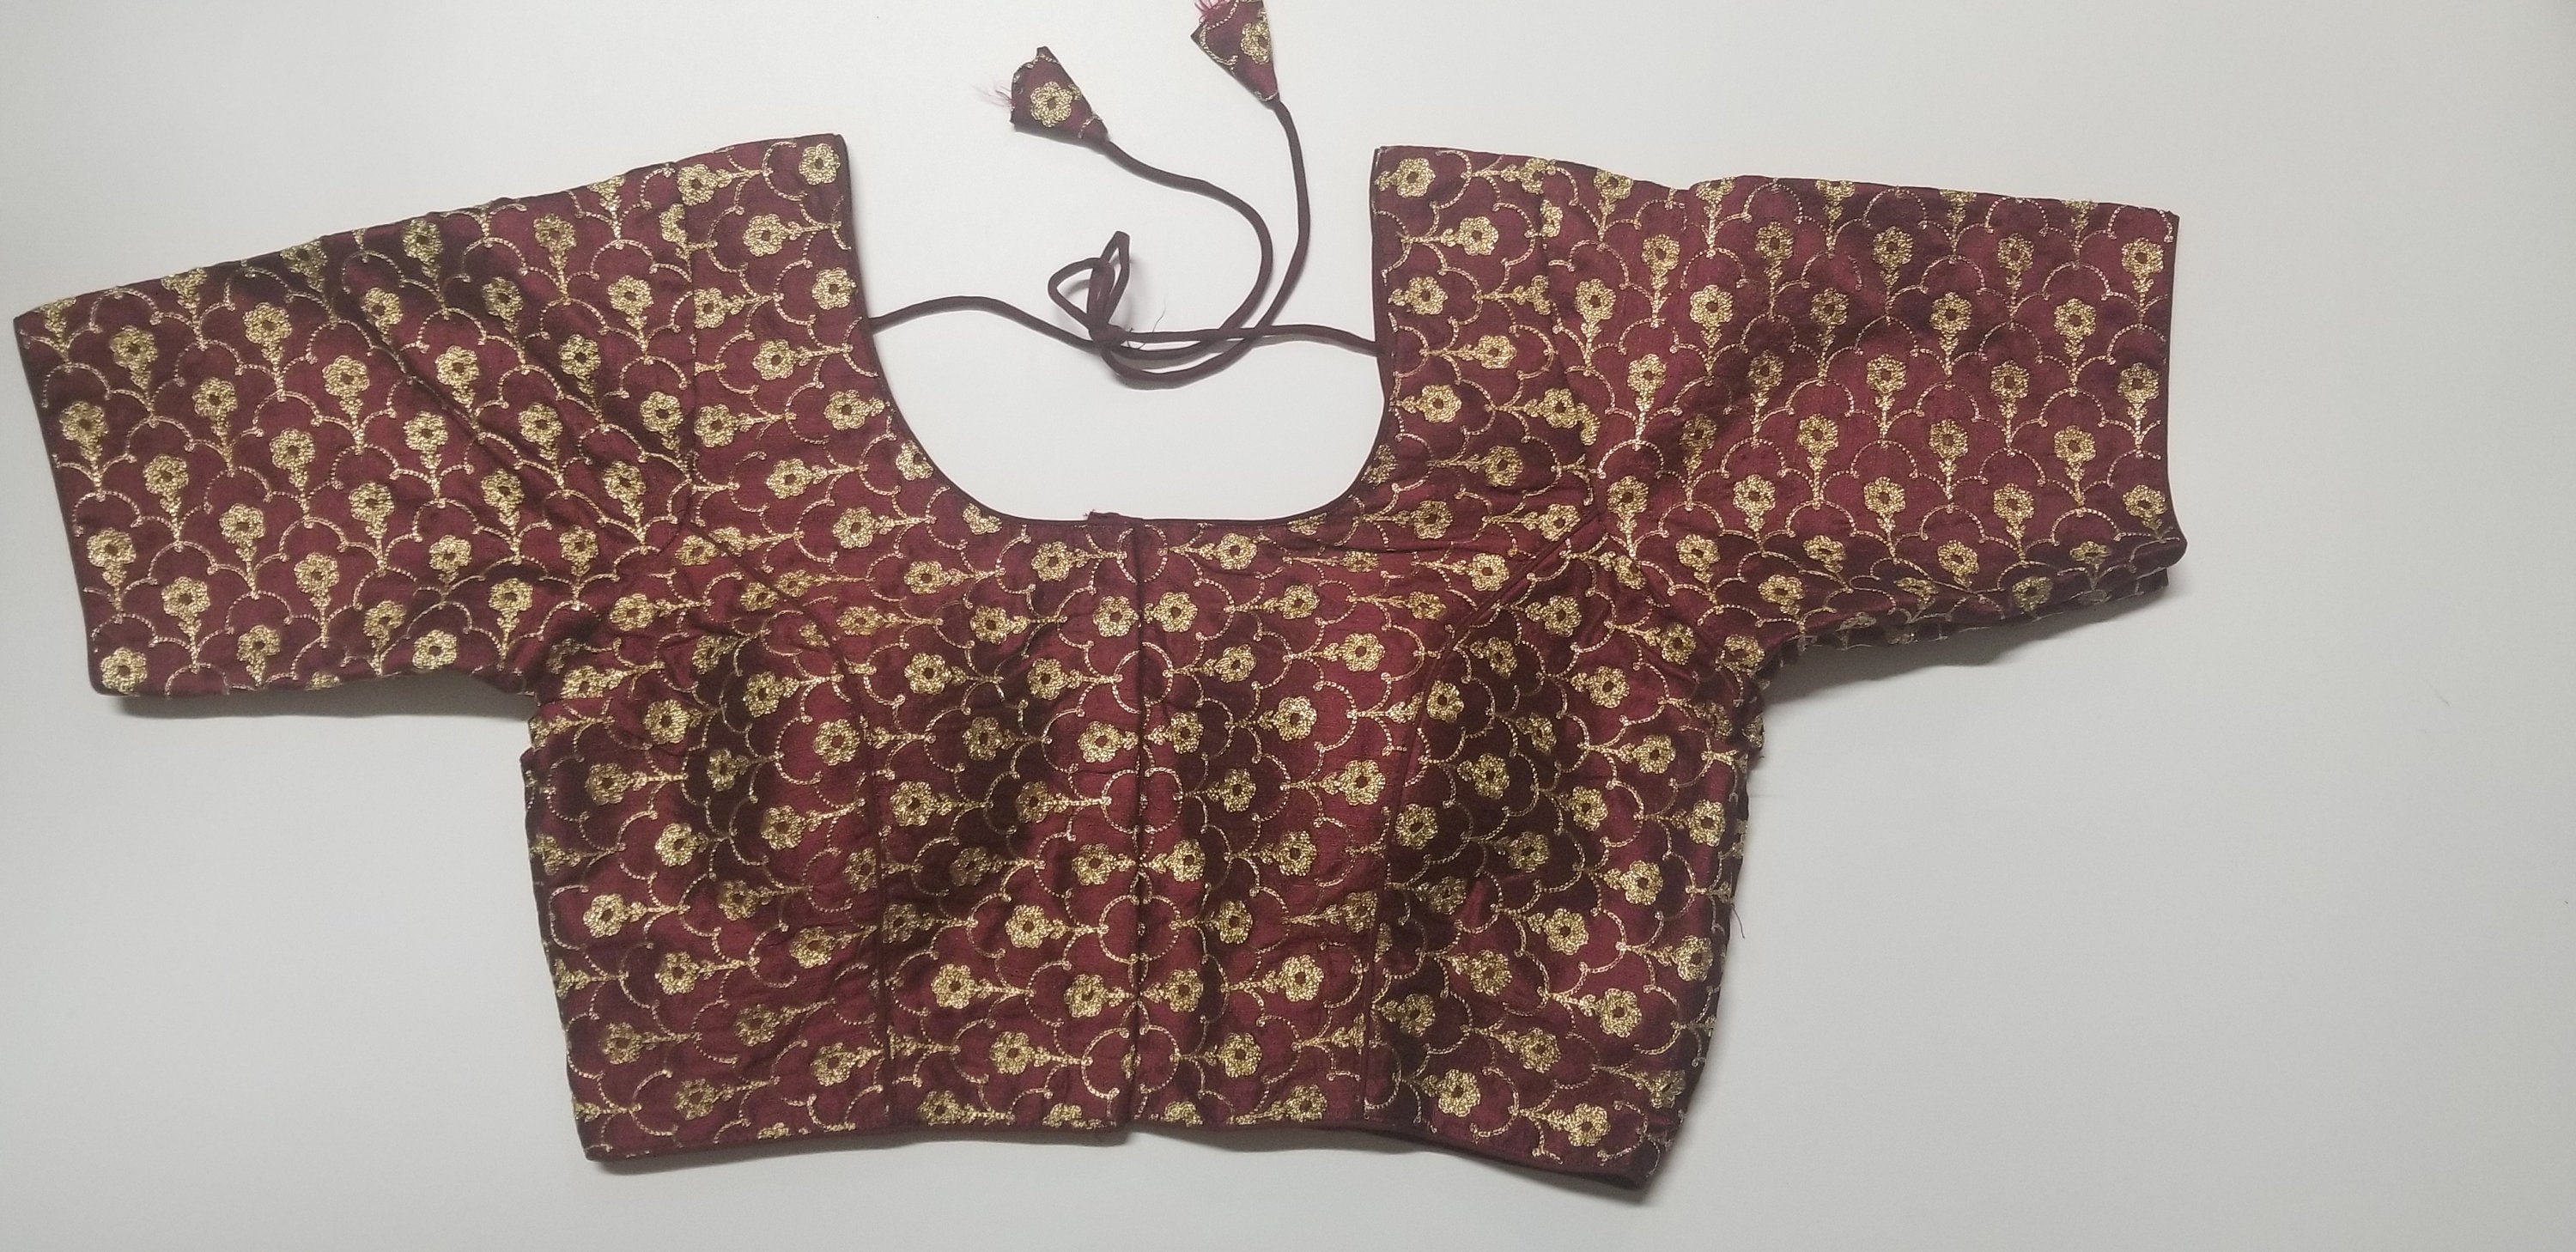 Readymade Saree Blouse - Maroon with golden flower embroidery Blouse - Princess cut padded - size 38" (can alter 34" - 42")